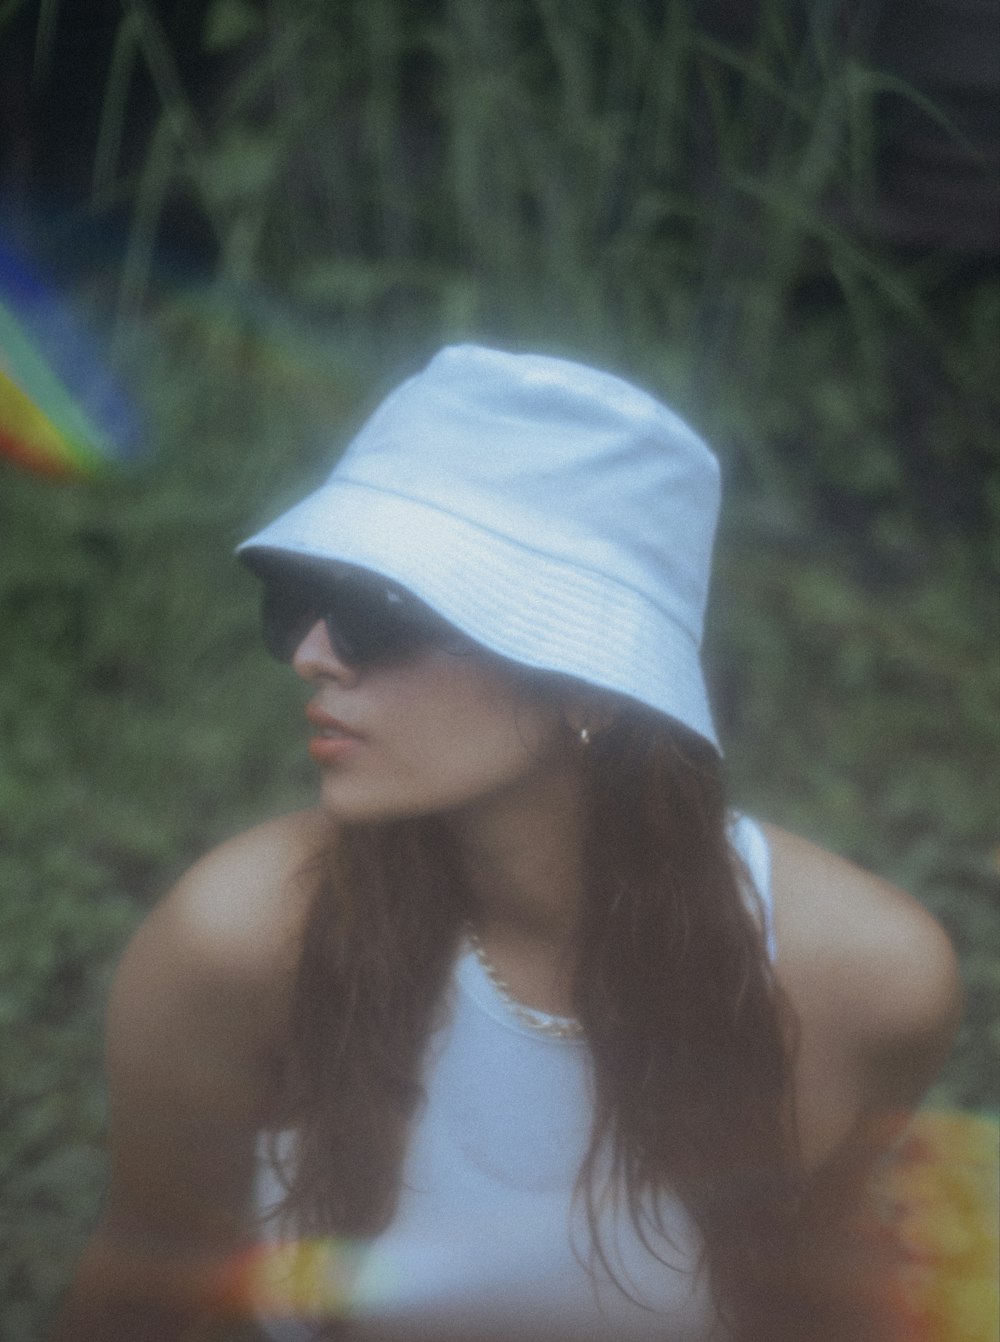 a woman wearing a white hat and sunglasses